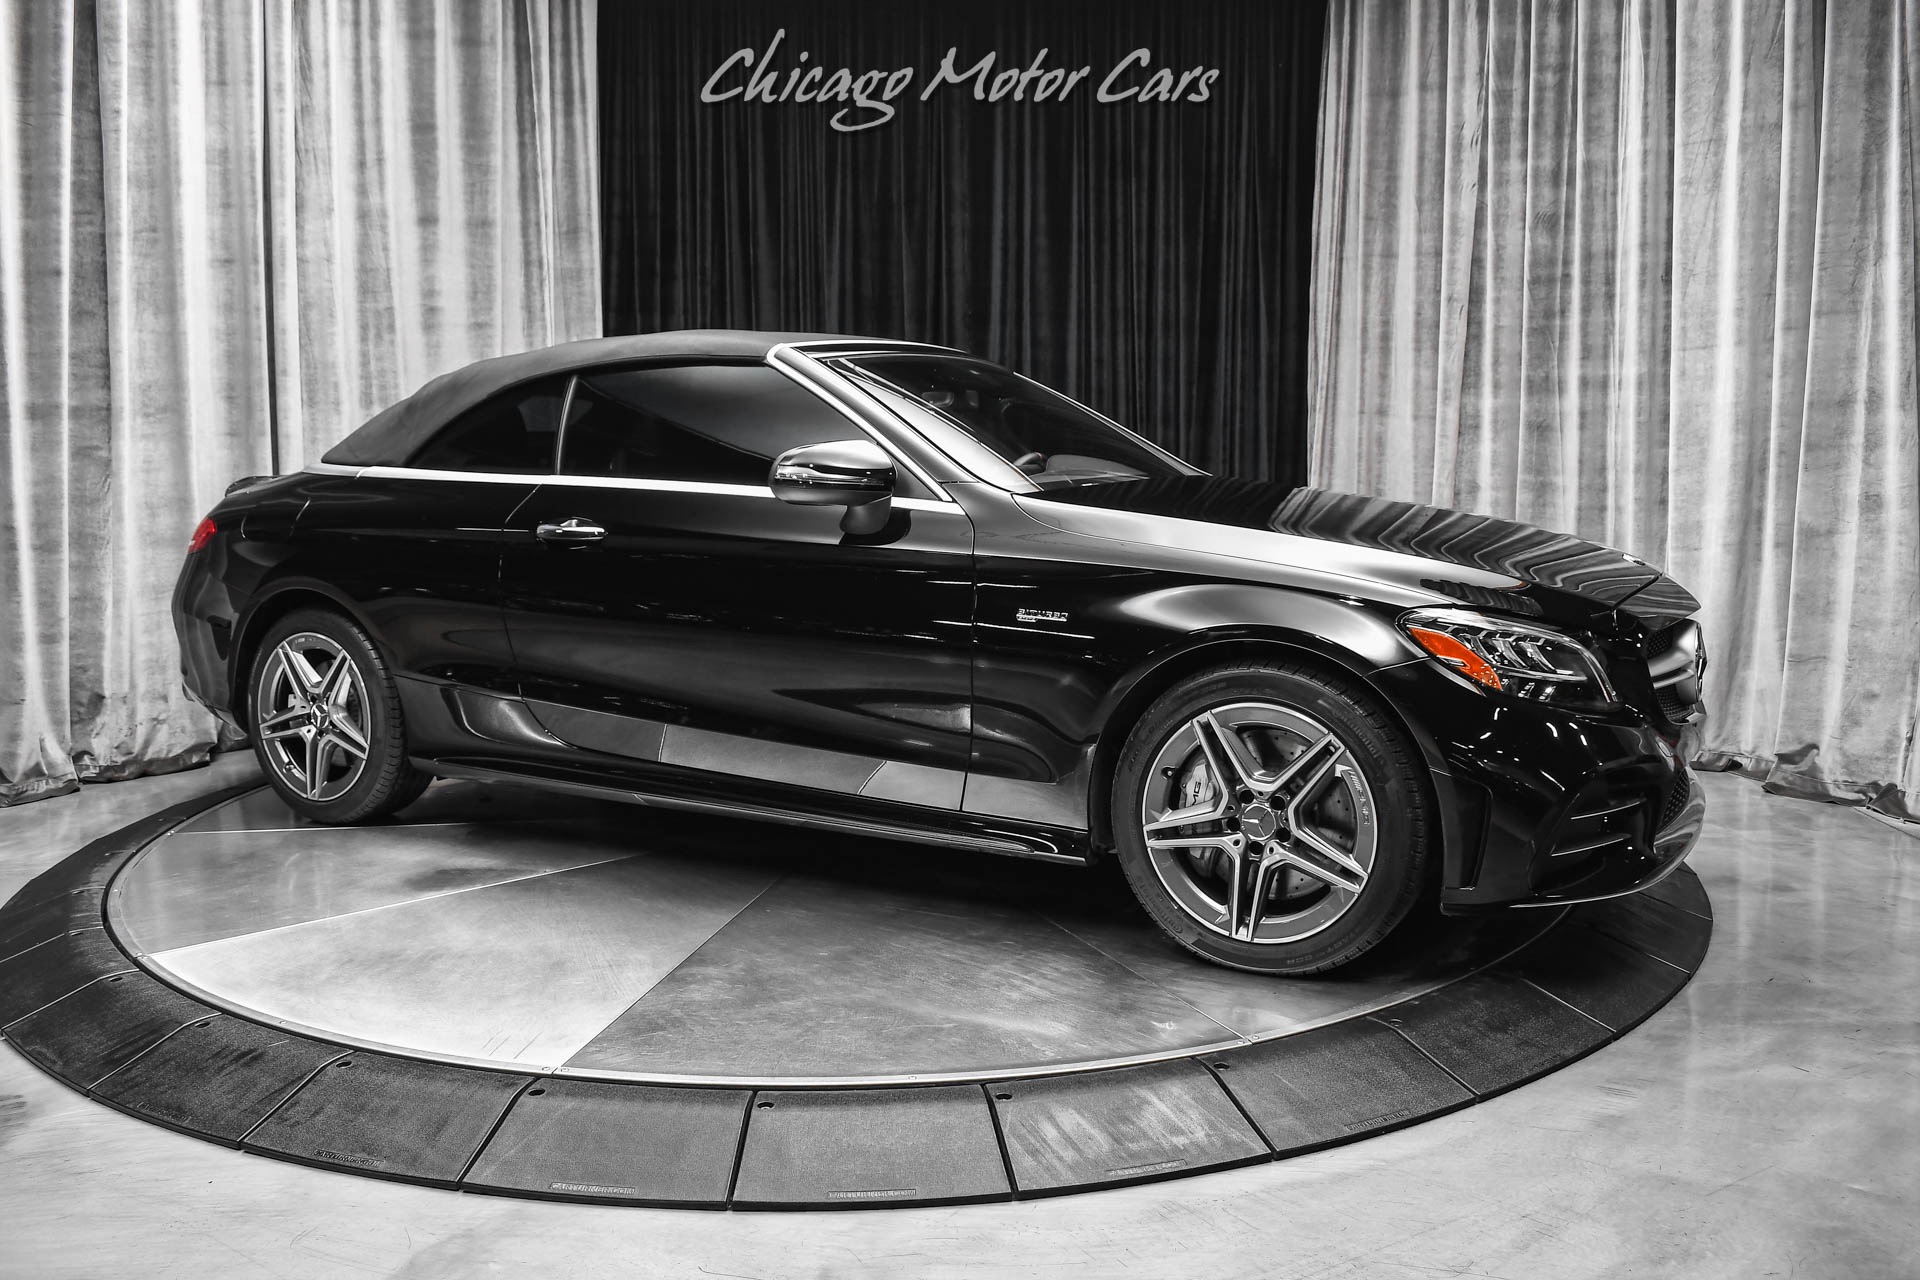 Used-2019-Mercedes-Benz-C43-AMG-Convertible-Low-Miles-Excellent-Condition-Throughout-18-AMG-Wheels